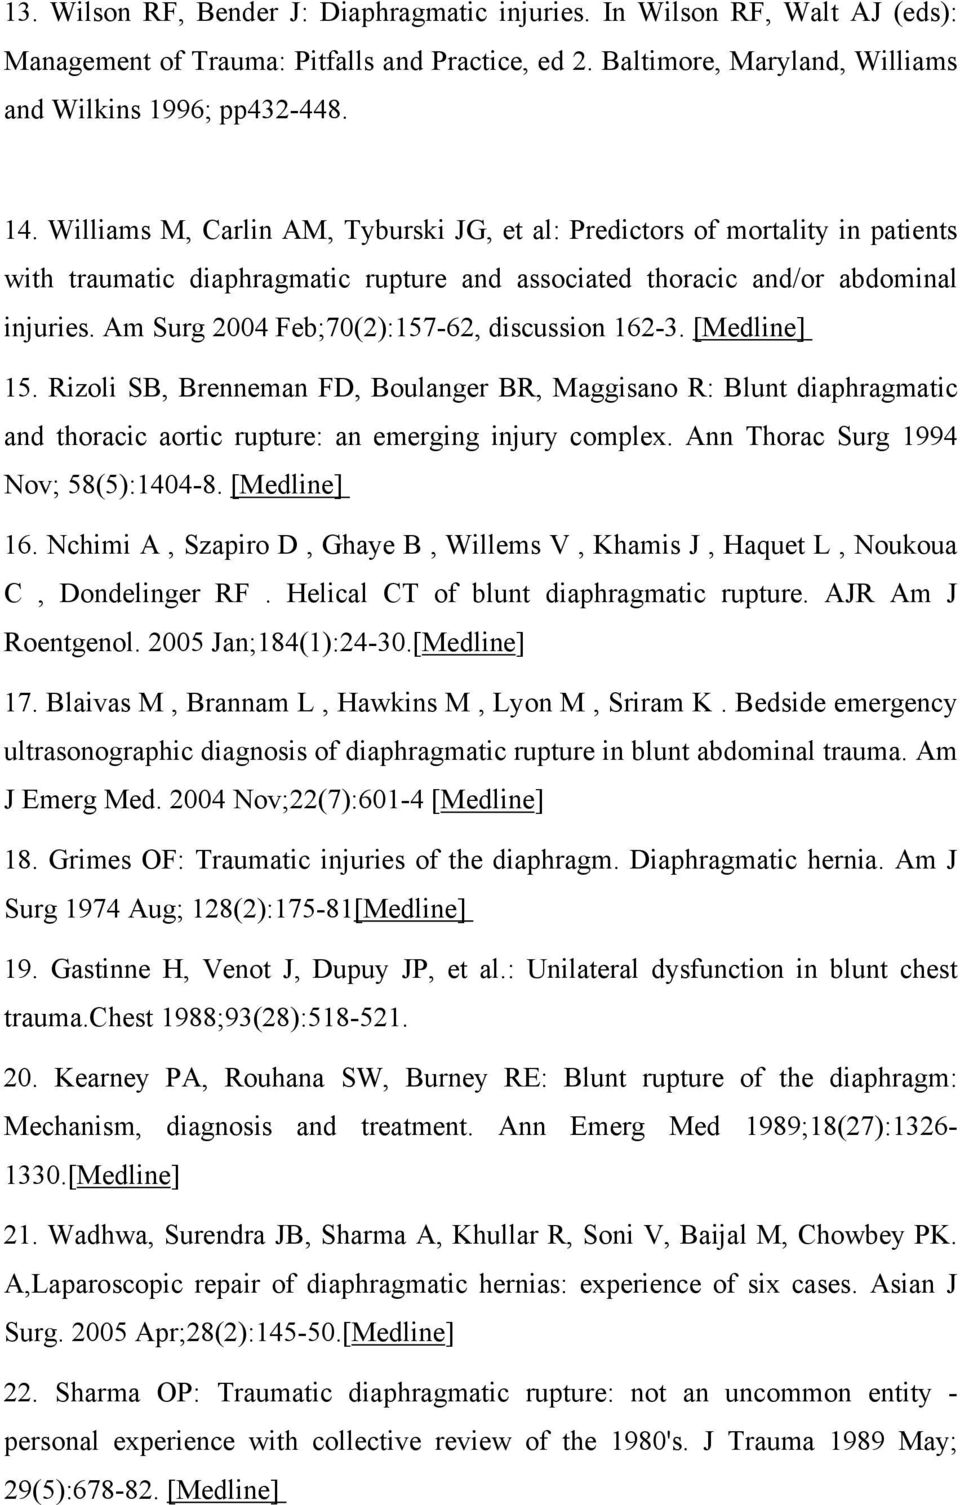 Am Surg 2004 Feb;70(2):157-62, discussion 162-3. [Medline] 15. Rizoli SB, Brenneman FD, Boulanger BR, Maggisano R: Blunt diaphragmatic and thoracic aortic rupture: an emerging injury complex.